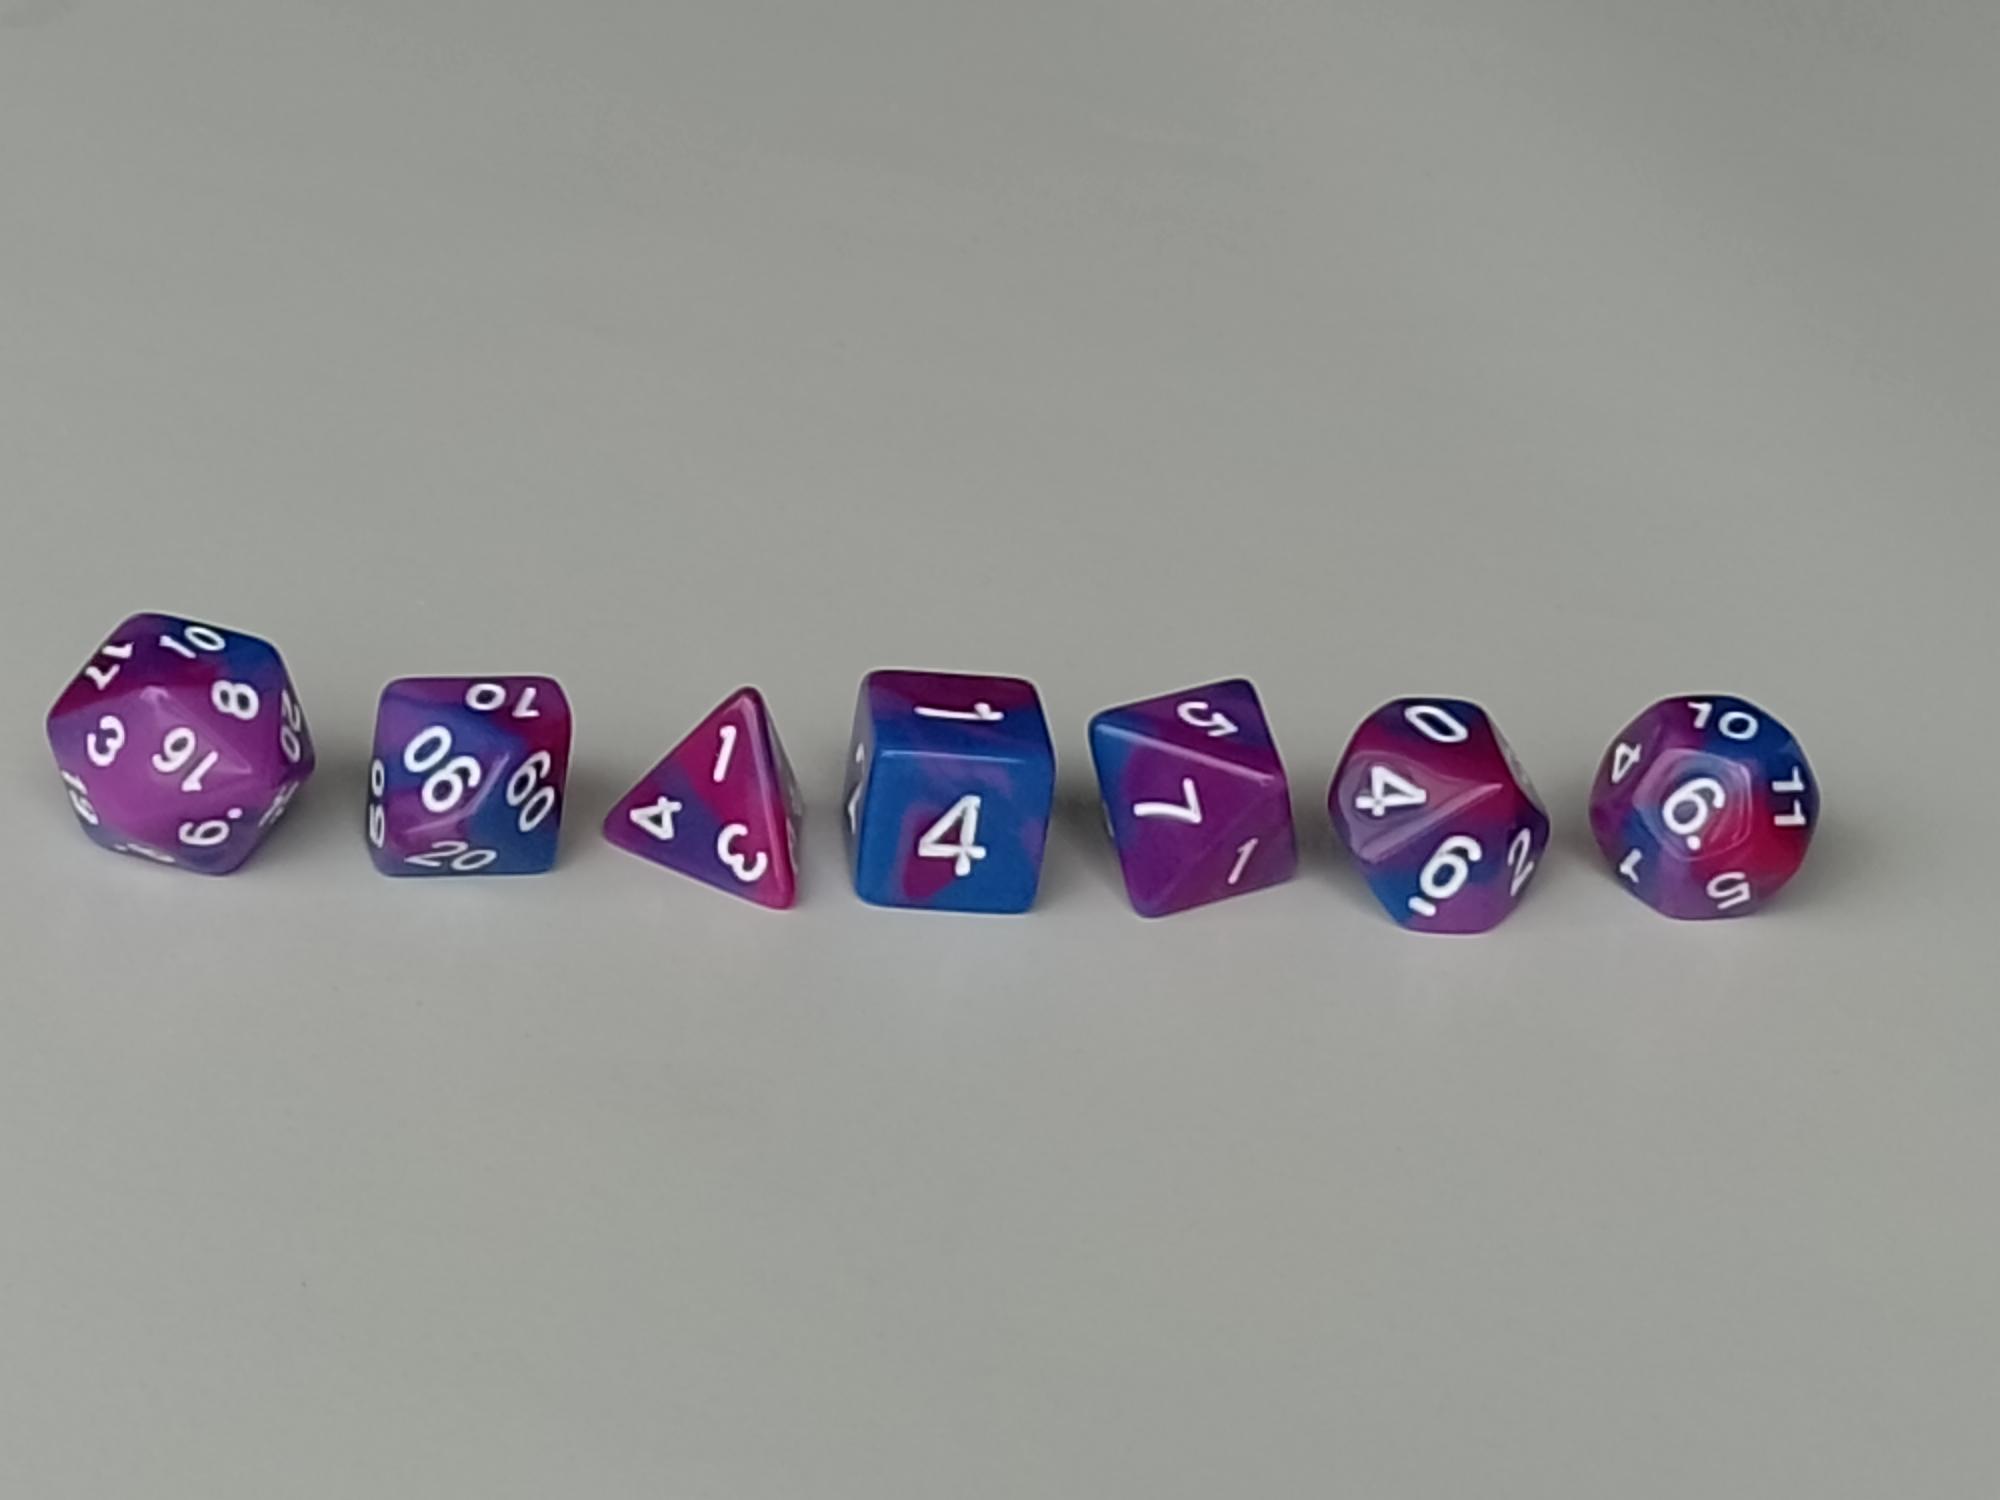  RPG Dice set (7) Blended in paars/rood/blauw